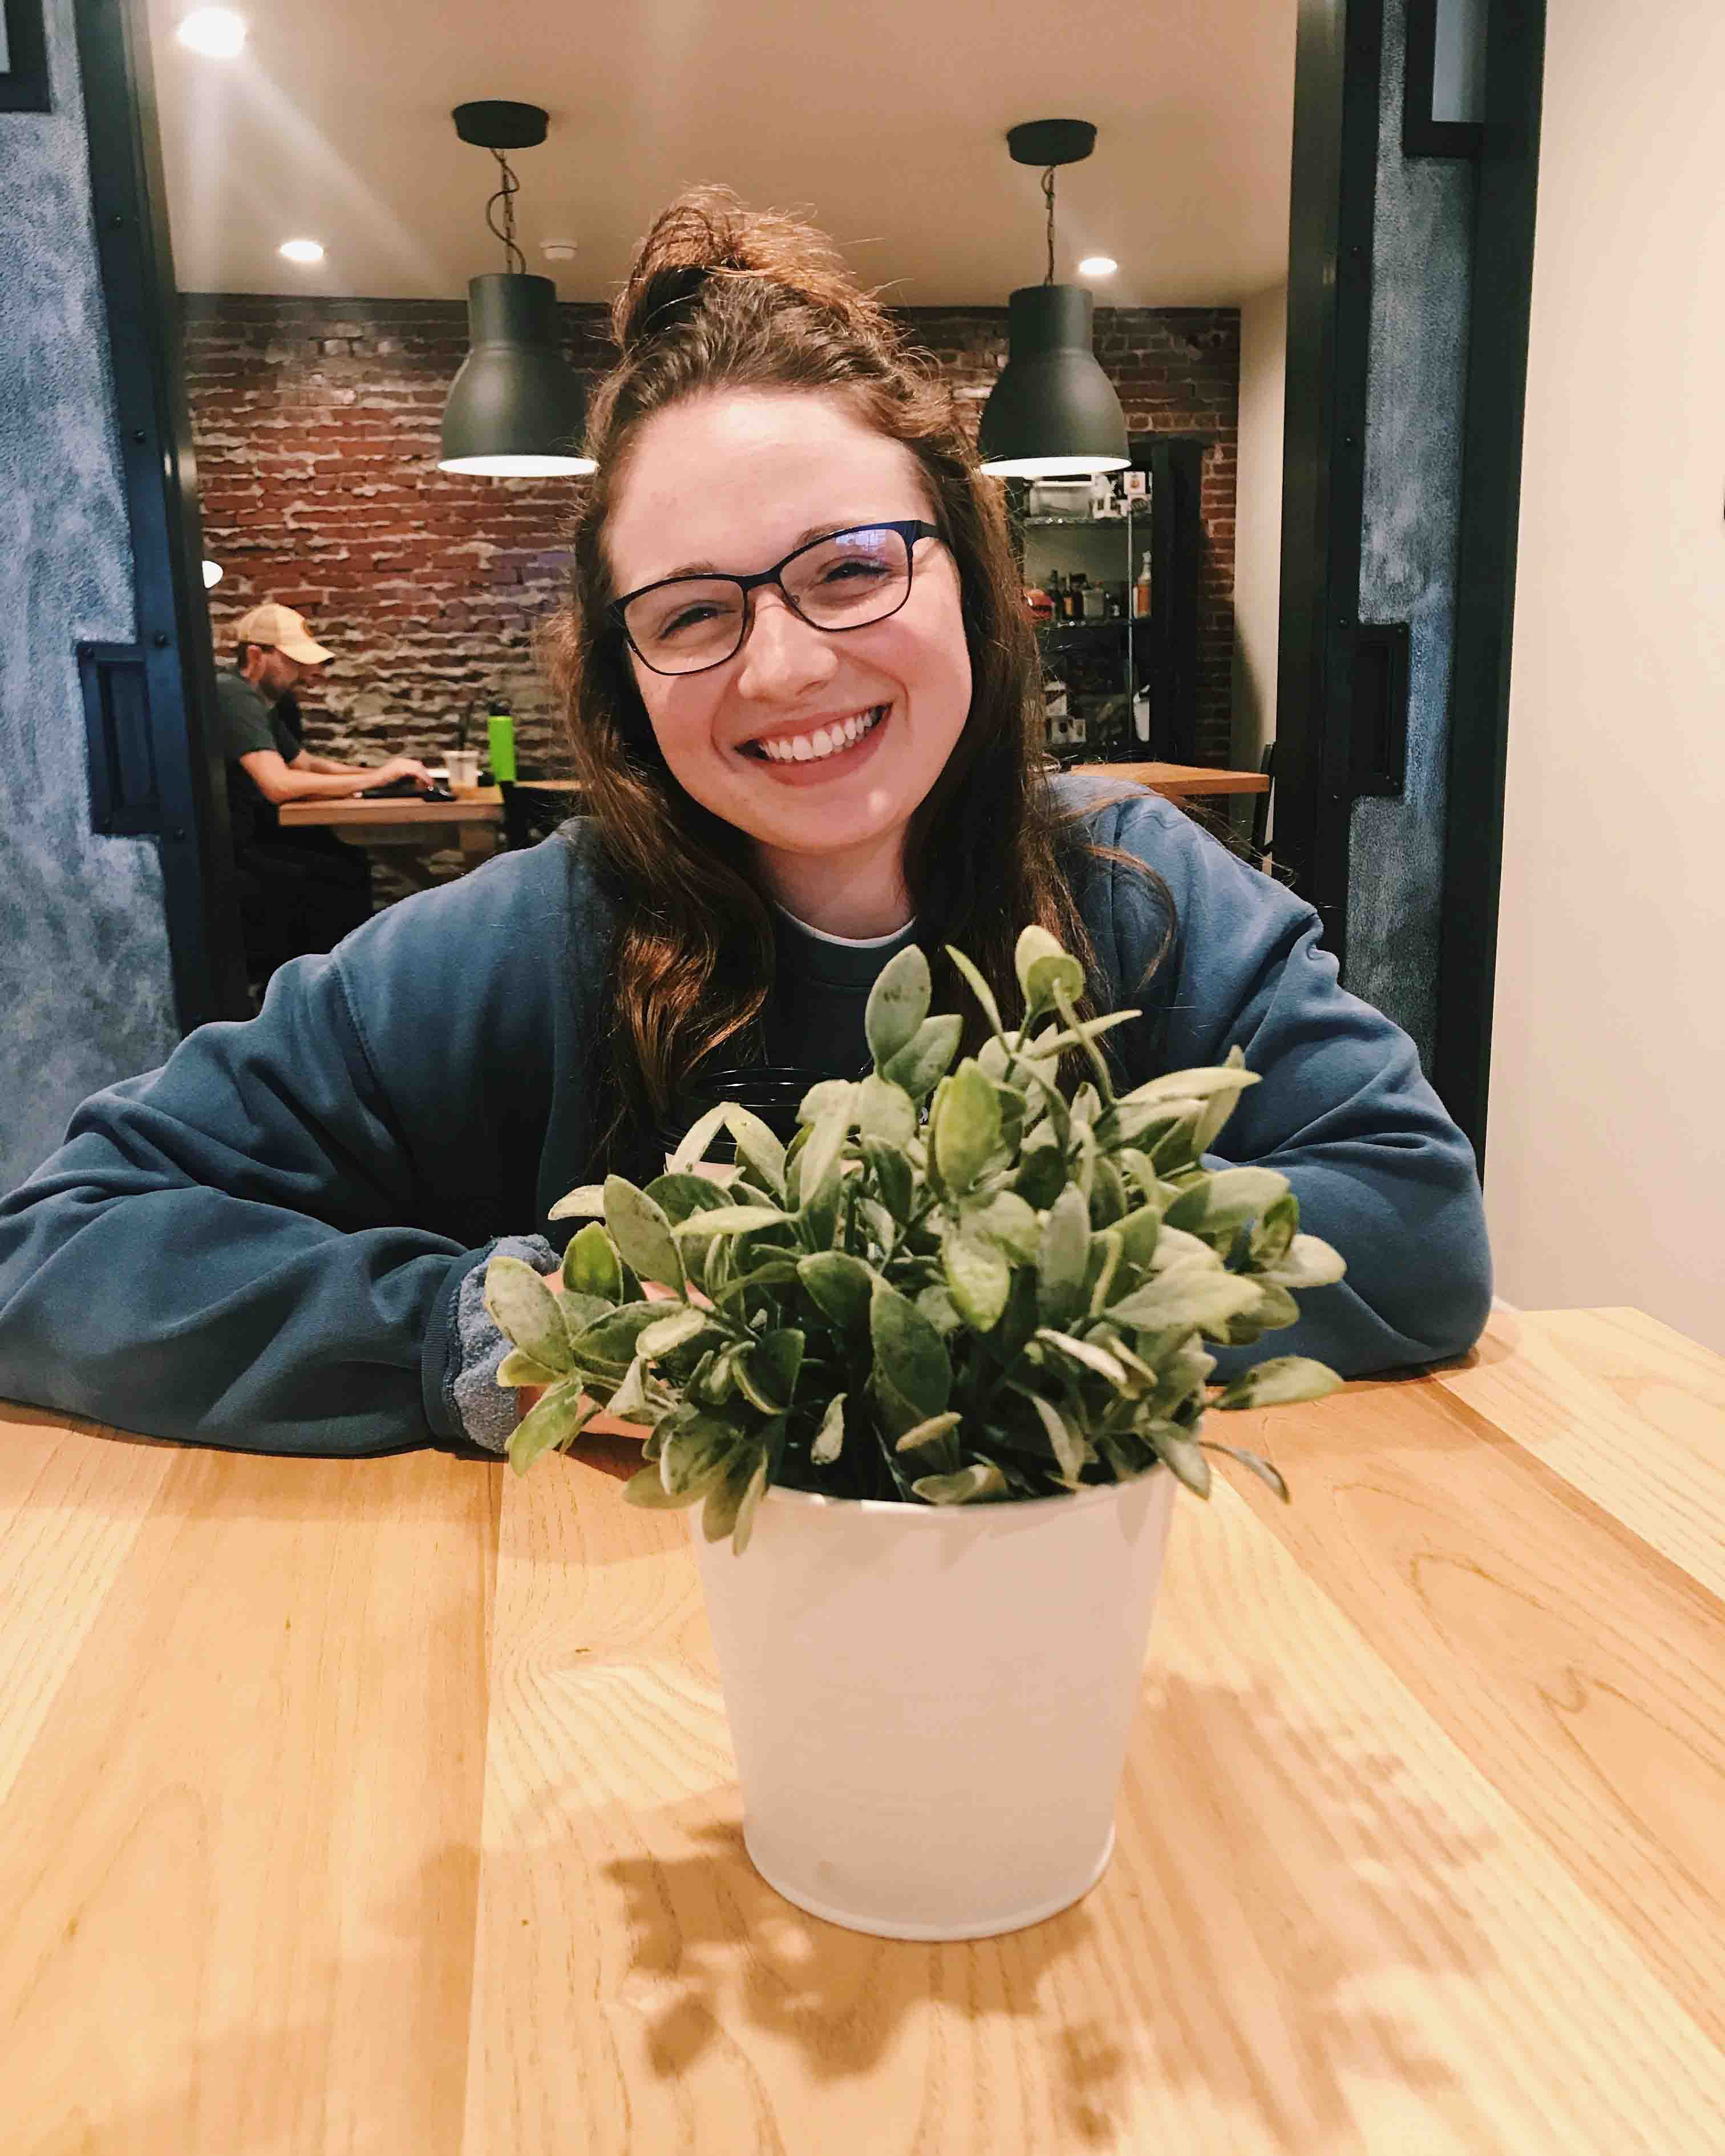 A young lady in glasses sitting in front of a potted plant.